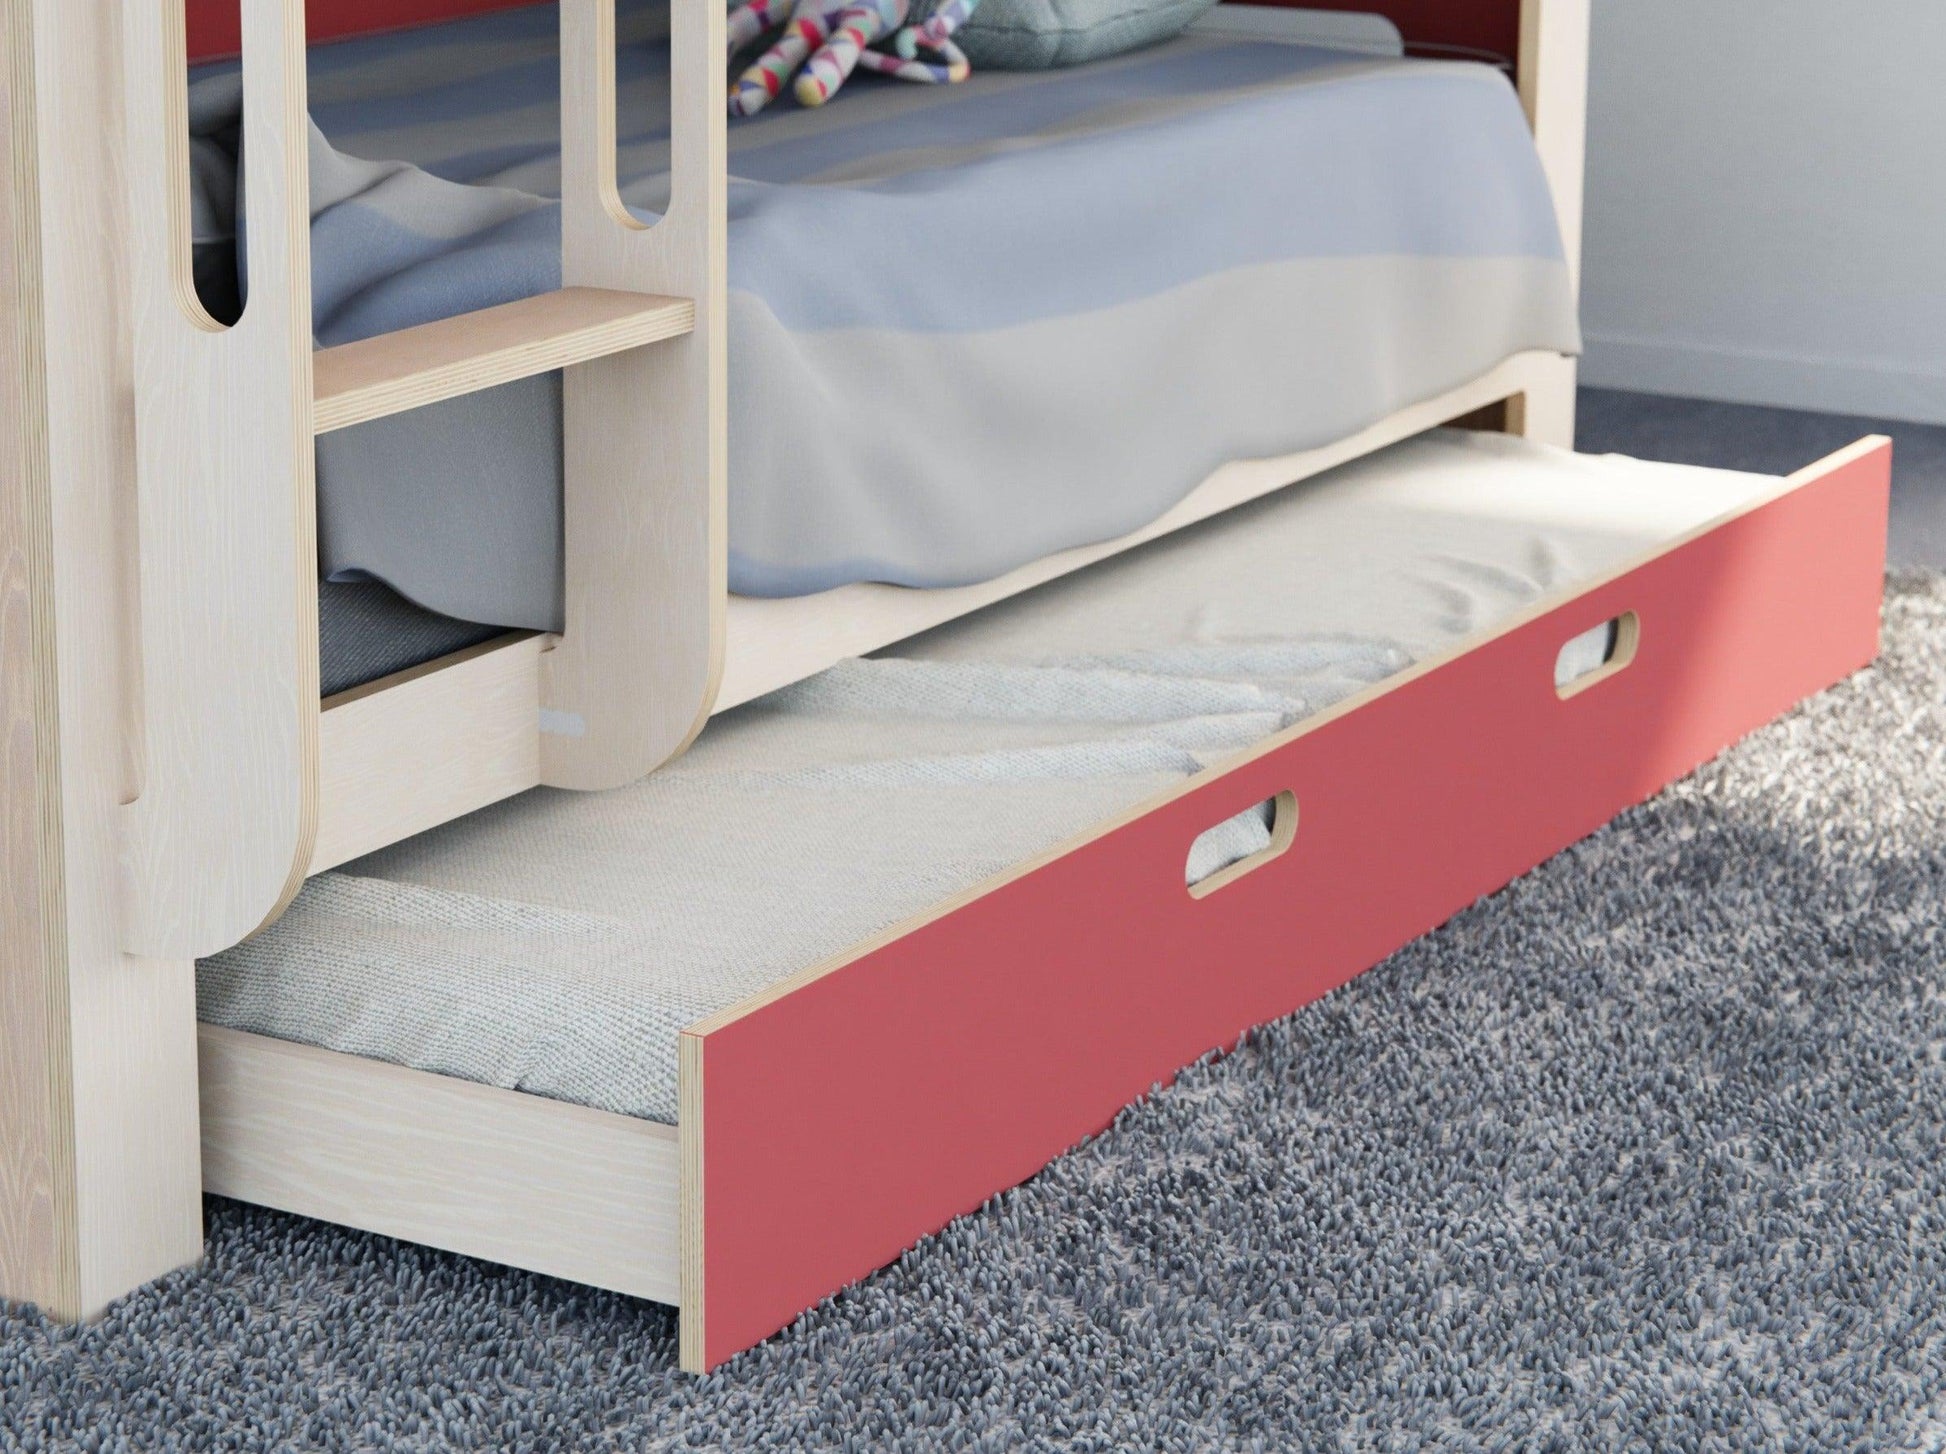 Revolutionize your space with our plywood bunk beds. Featuring study set, storage, in captivating red.